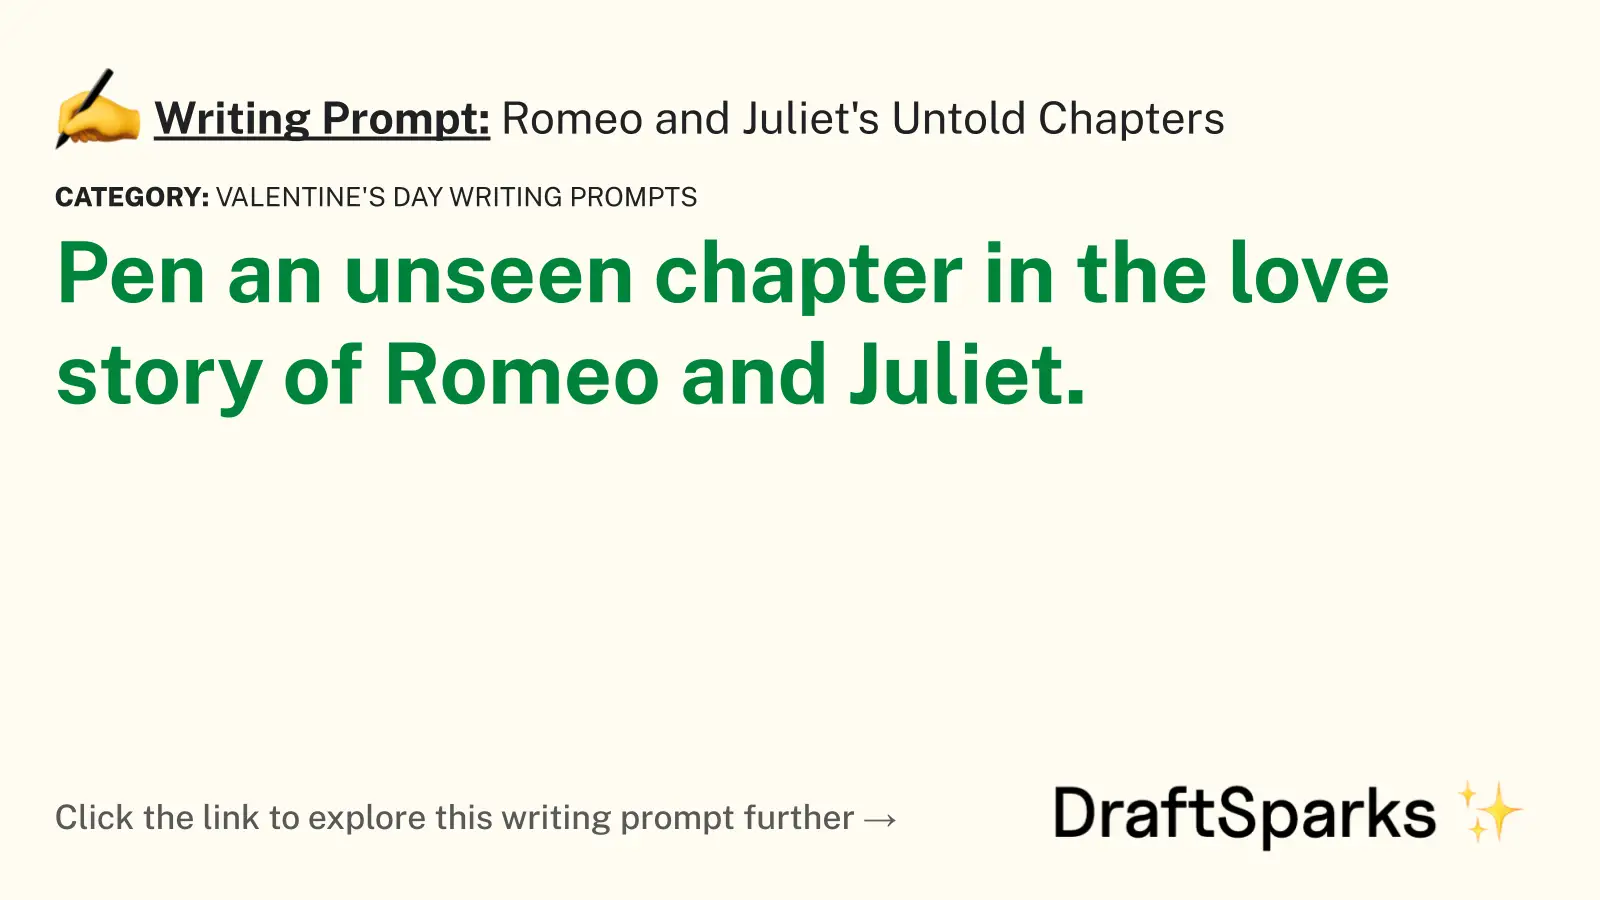 Romeo and Juliet’s Untold Chapters